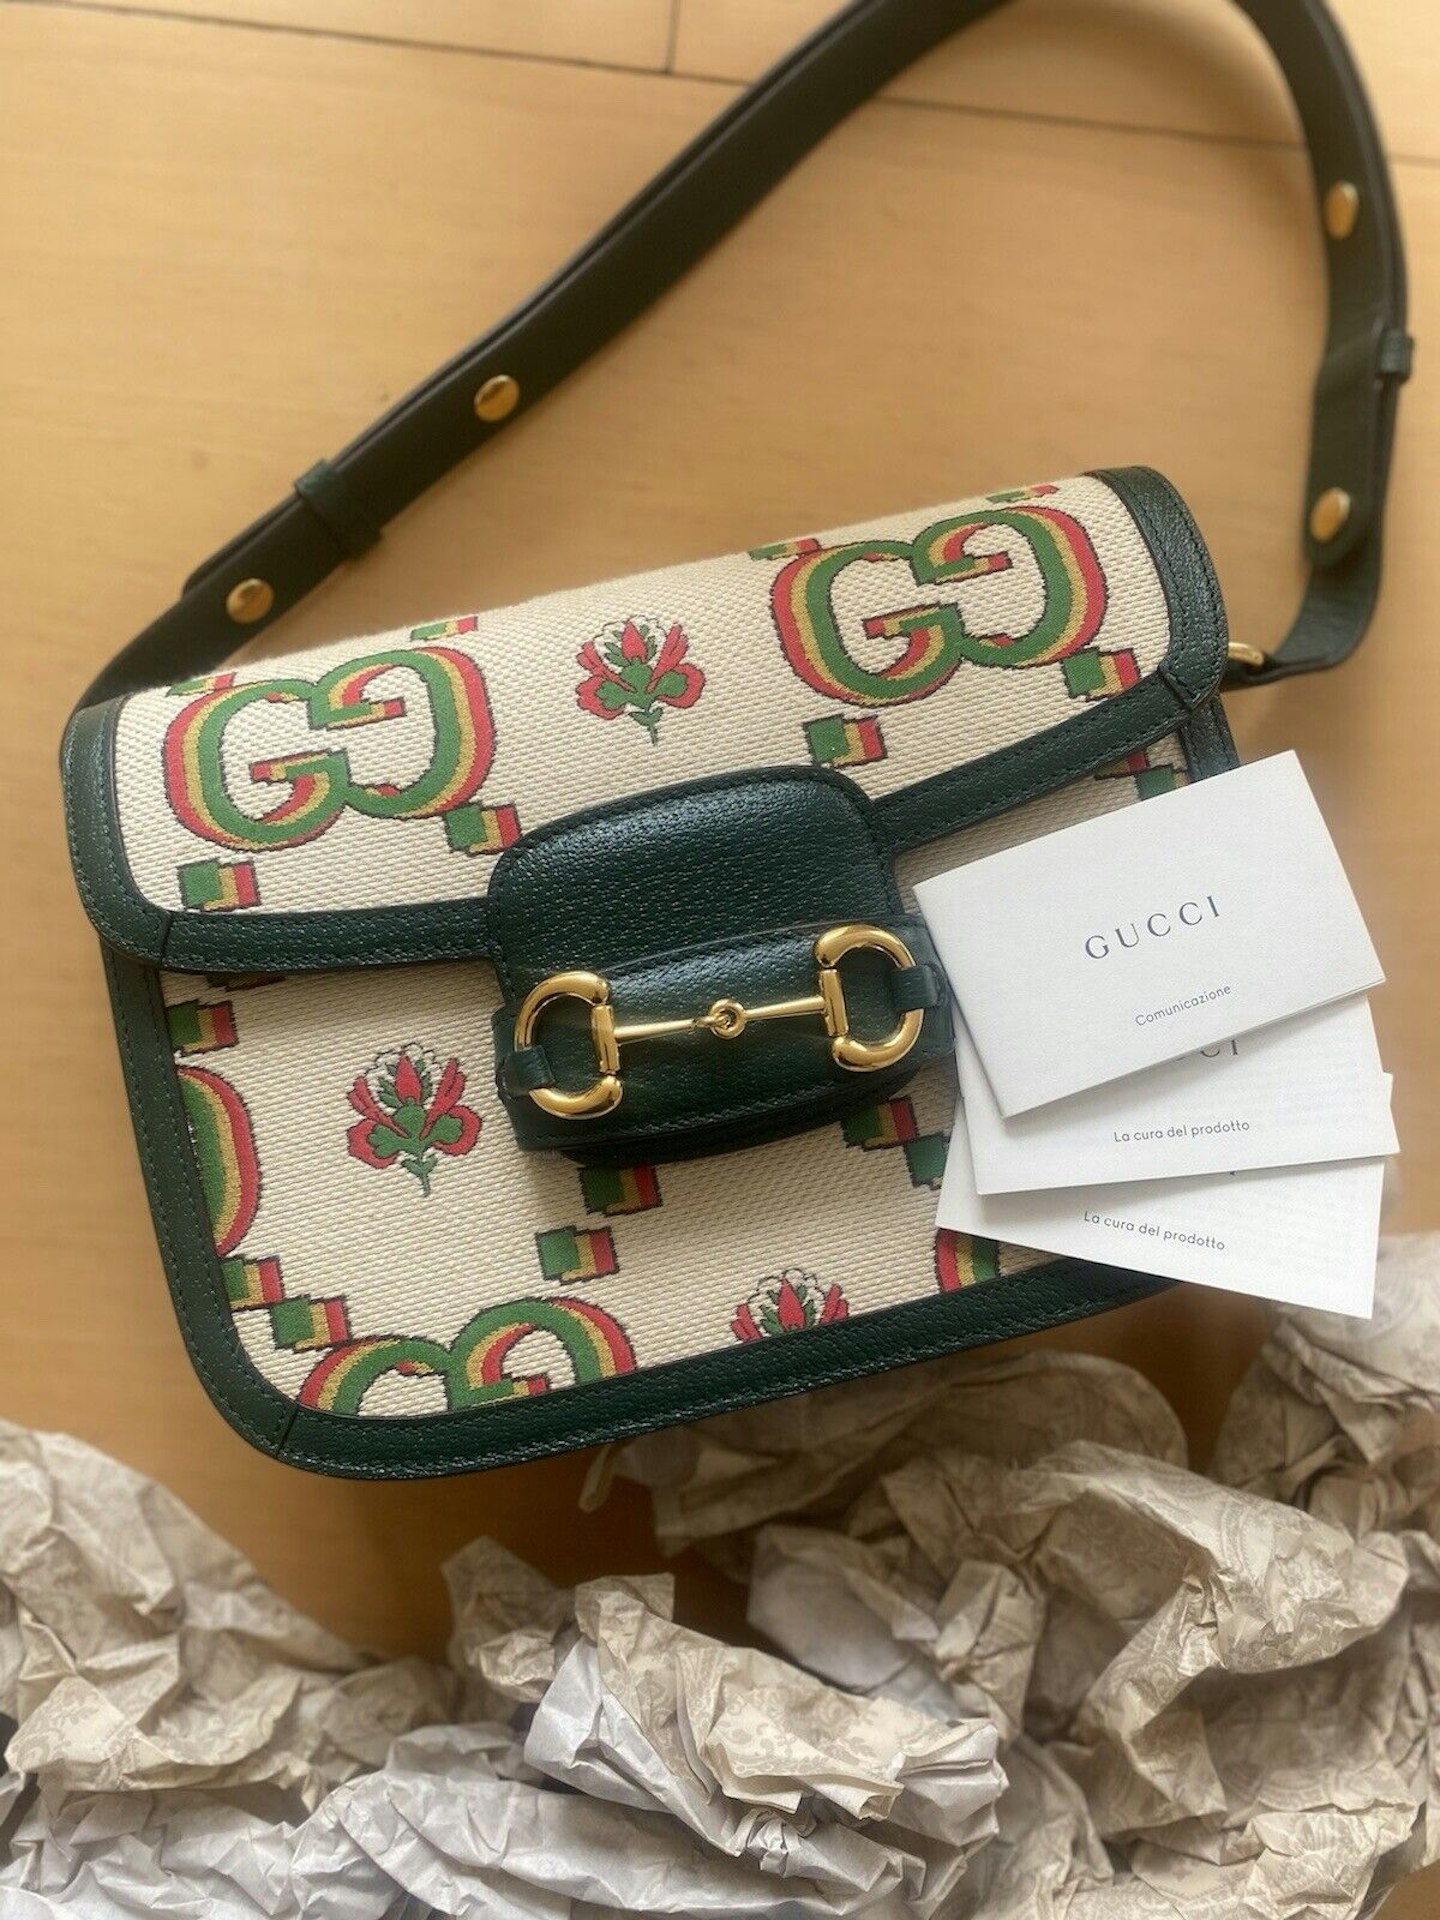 Spotted while shopping on Poshmark: Gucci Horsebit Shoulder Bag by